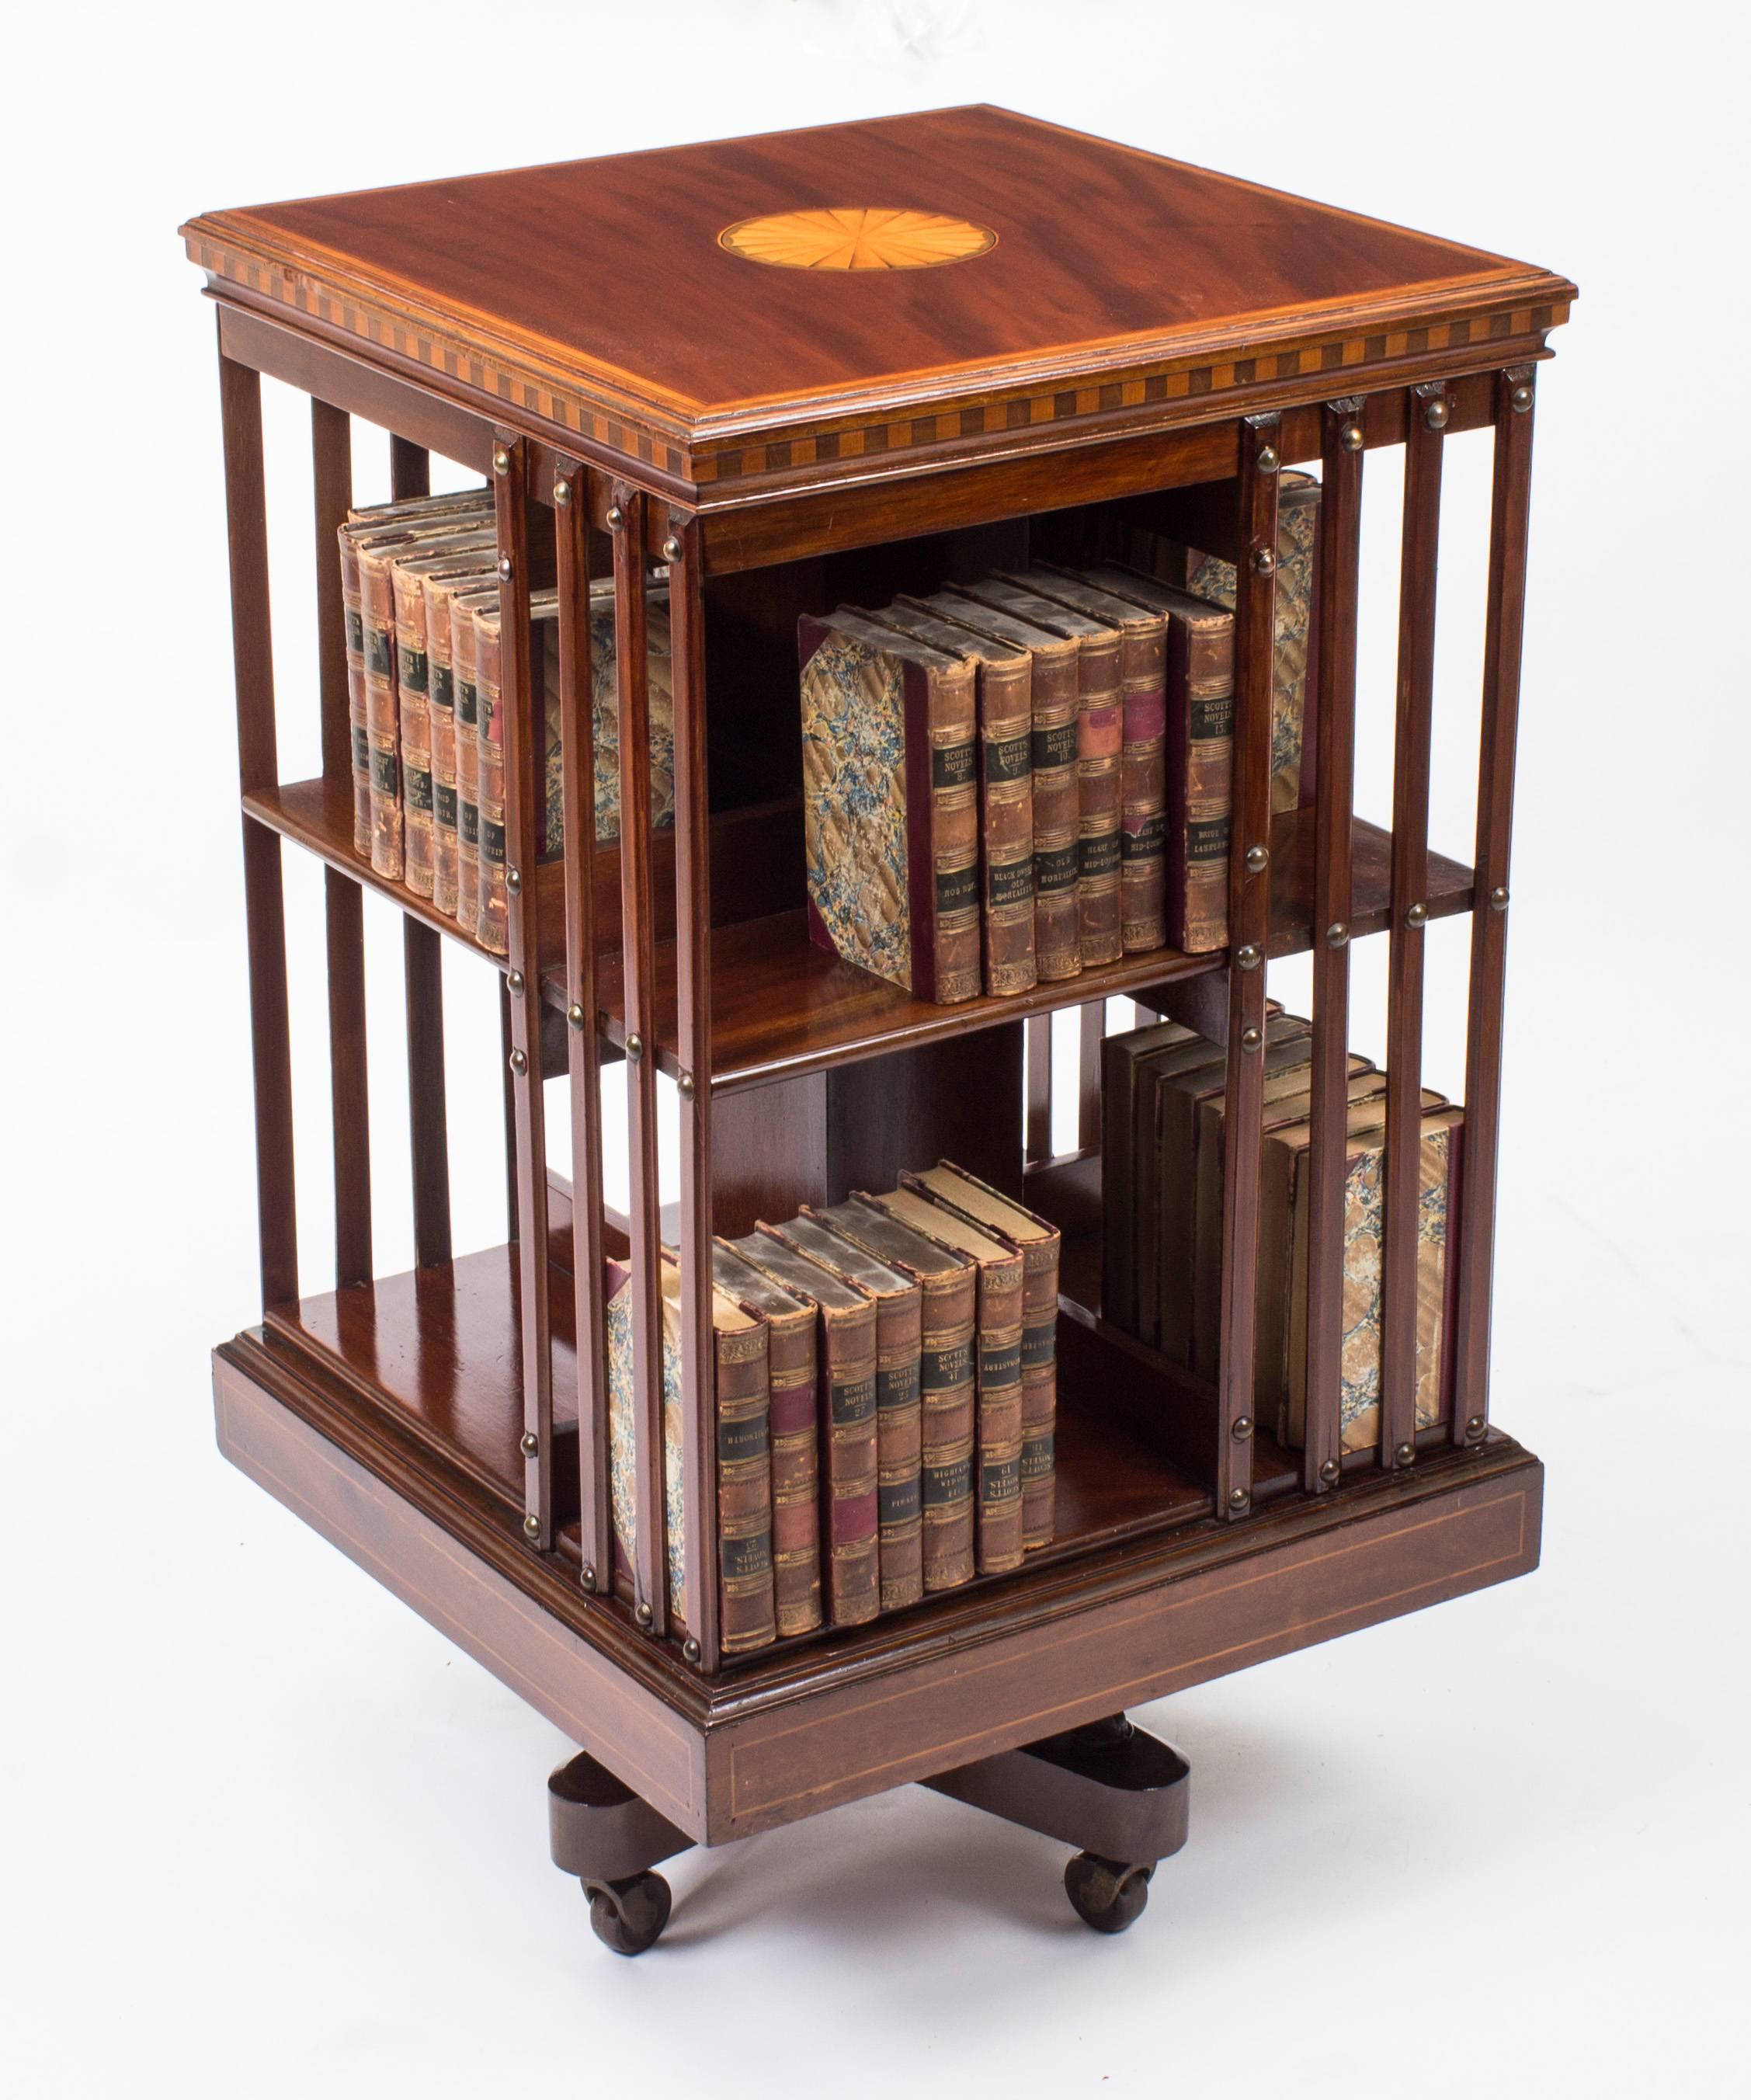 This an exquisite antique revolving bookcase attributed to the renowned retailer and manufacturer Maple & Co., circa 1900 in date.

It is made of mahogany, revolves on a solid cast iron base, has inlaid boxwood lines to the top and bottom, the